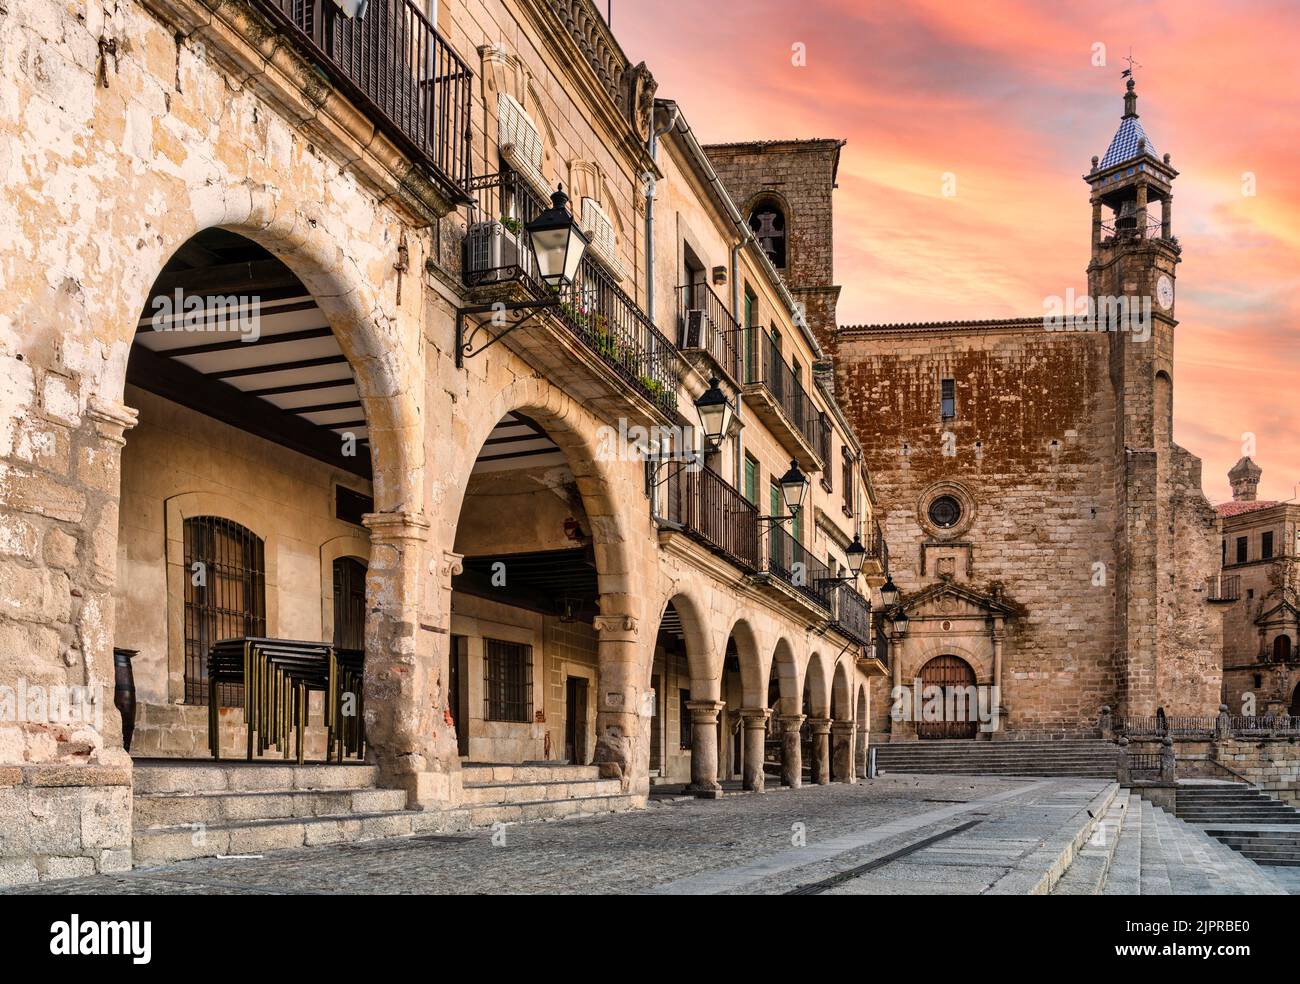 Arch of Trujillo old town at sunset in Extremadura, Spain Stock Photo